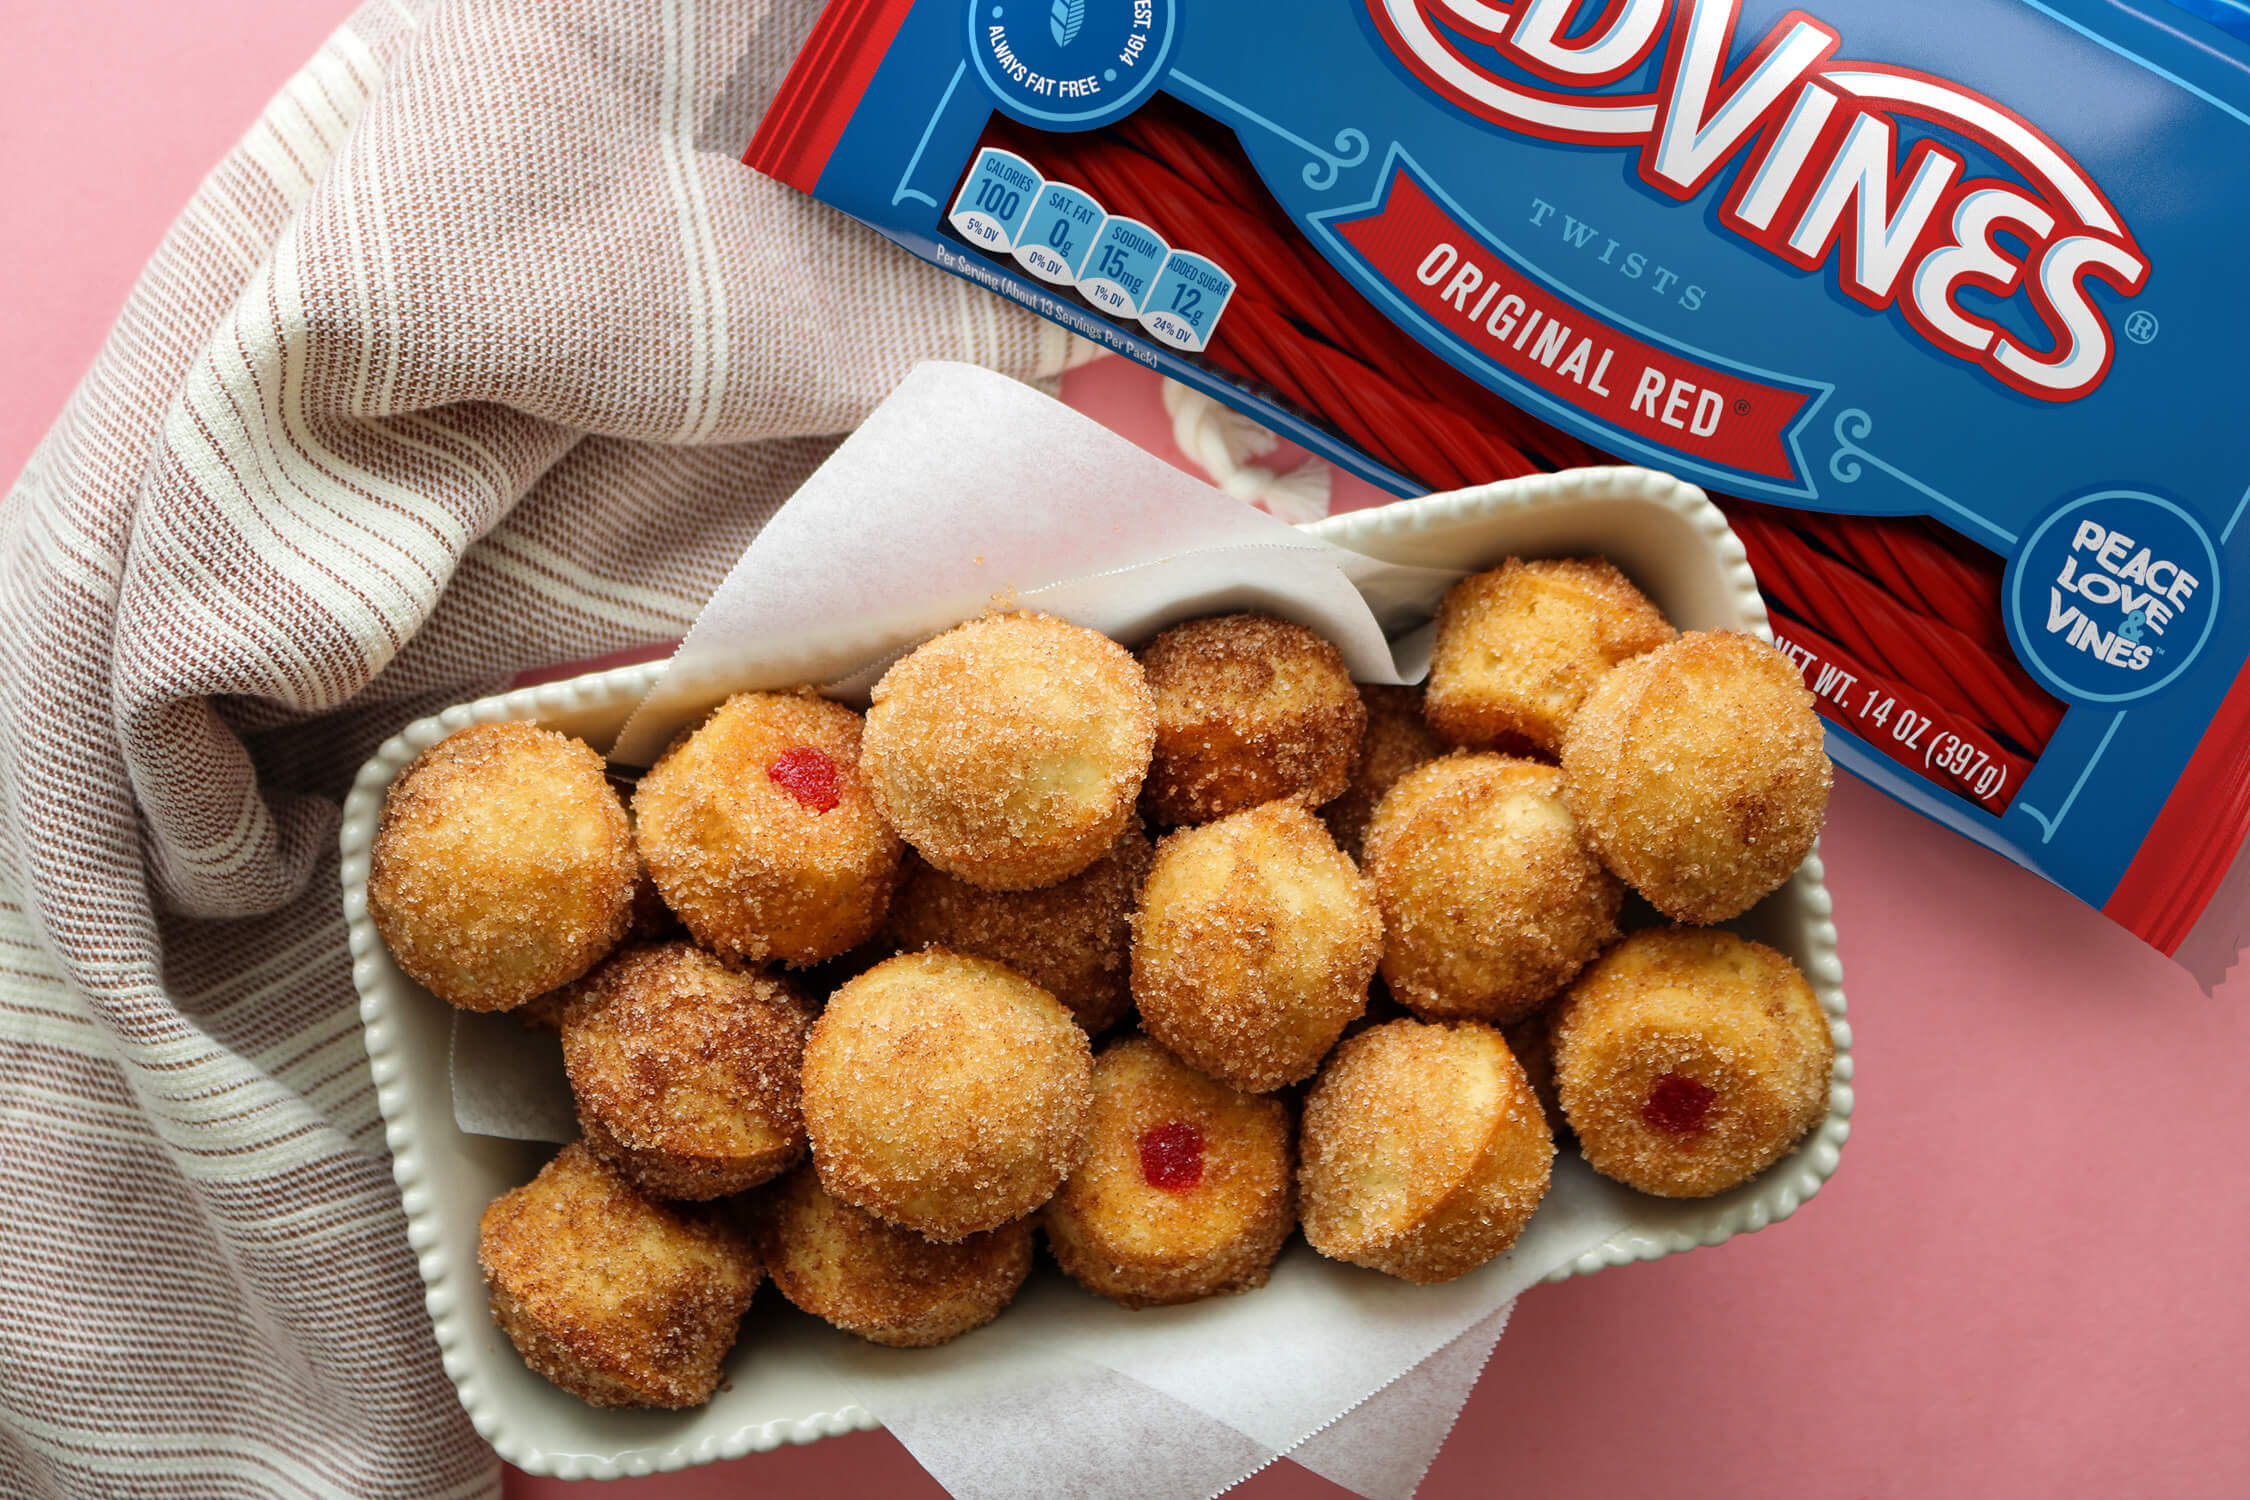 Red Vines Licorice Filled Donut Holes